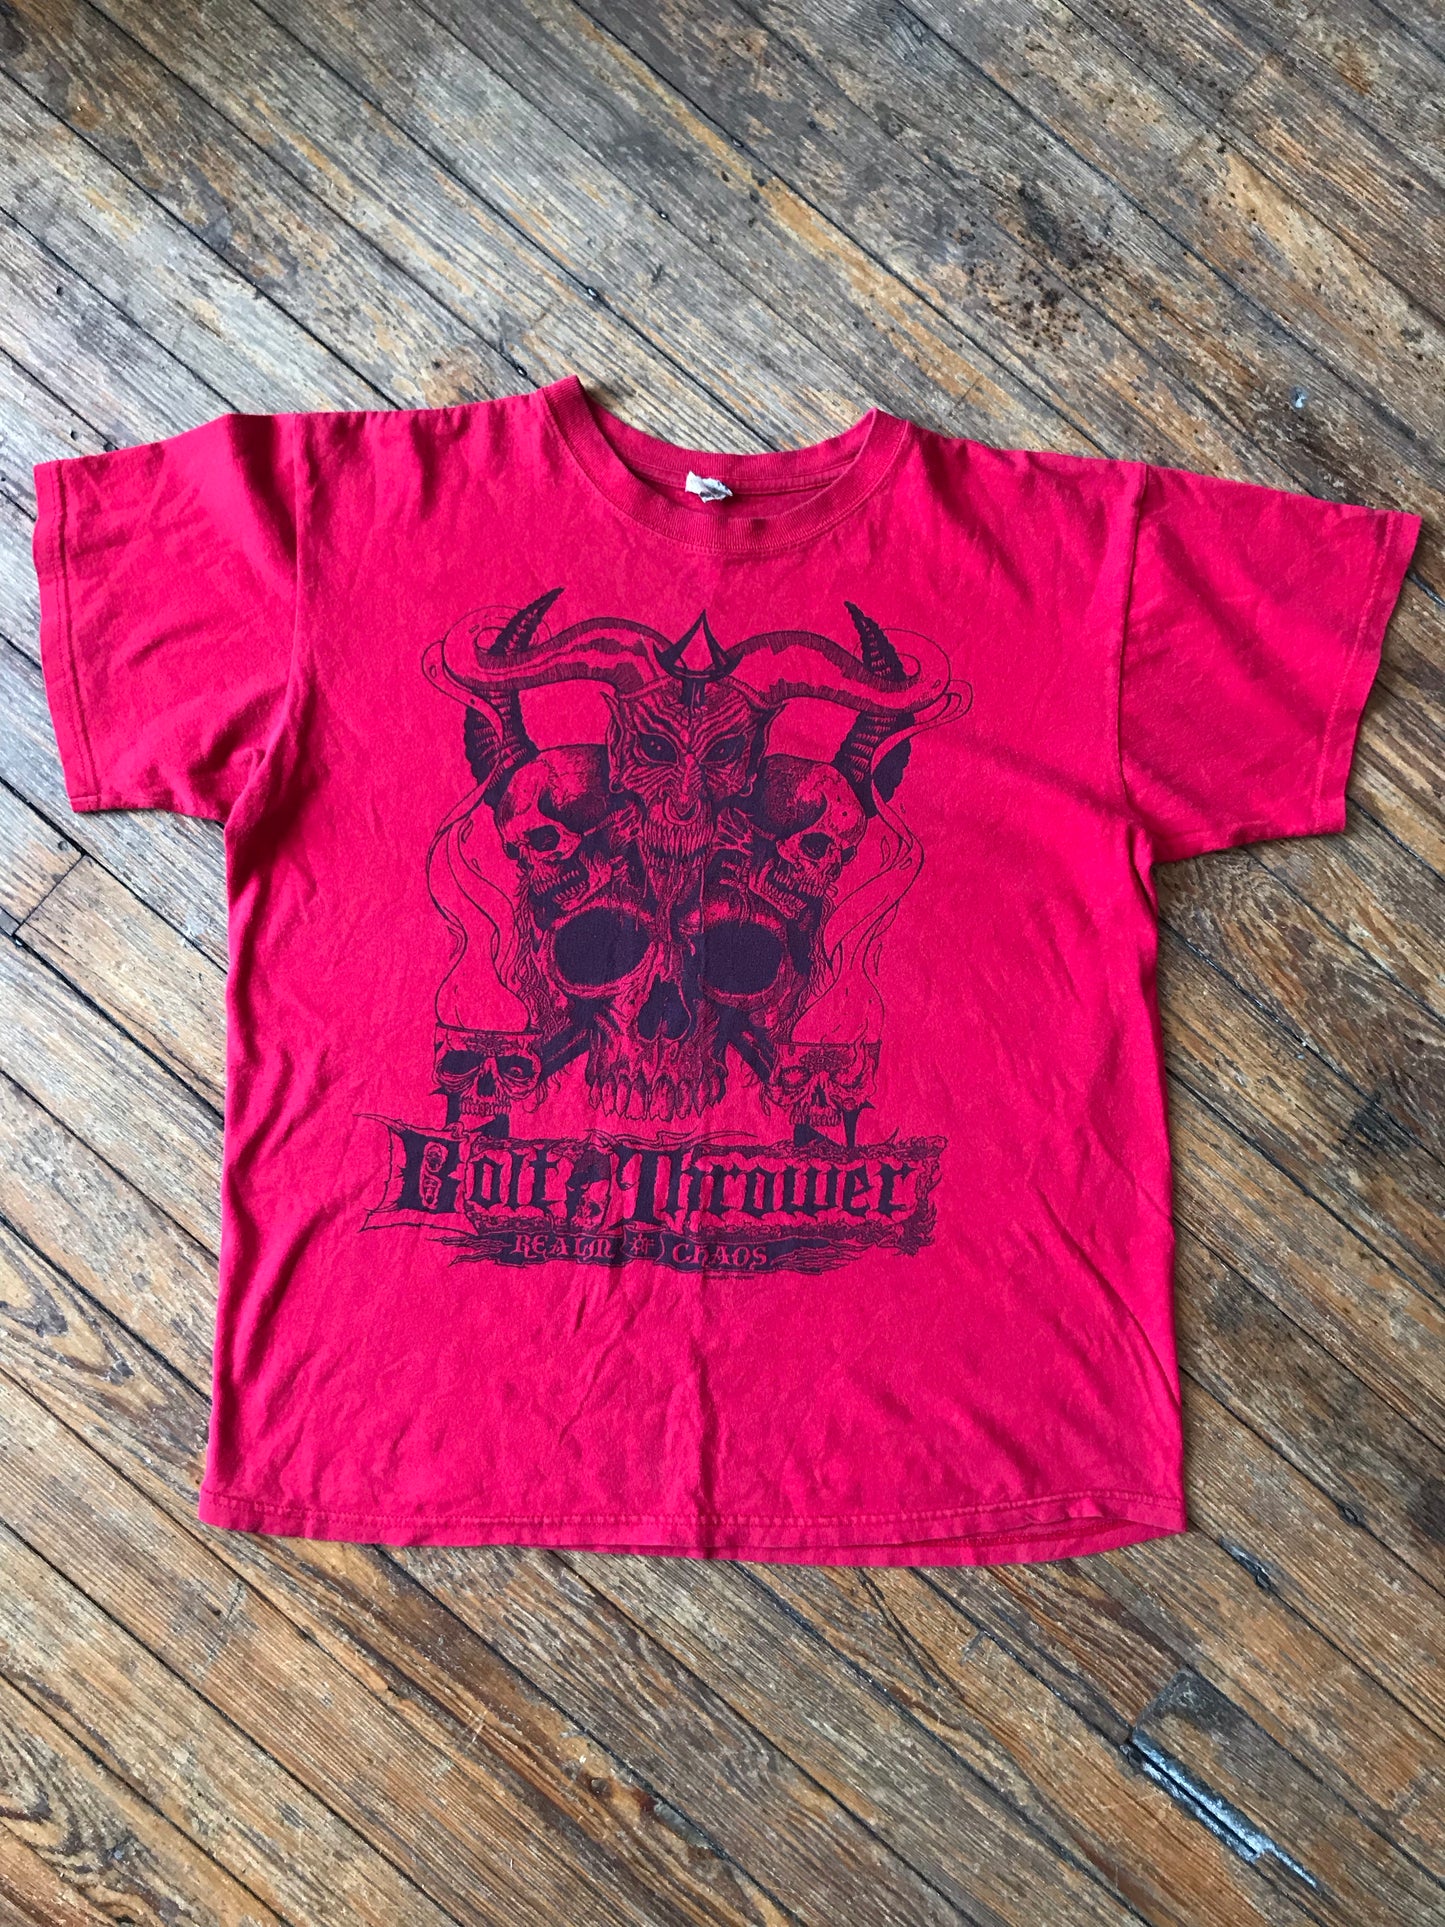 2009 Red Bolt Thrower Realm of Chaos Tee